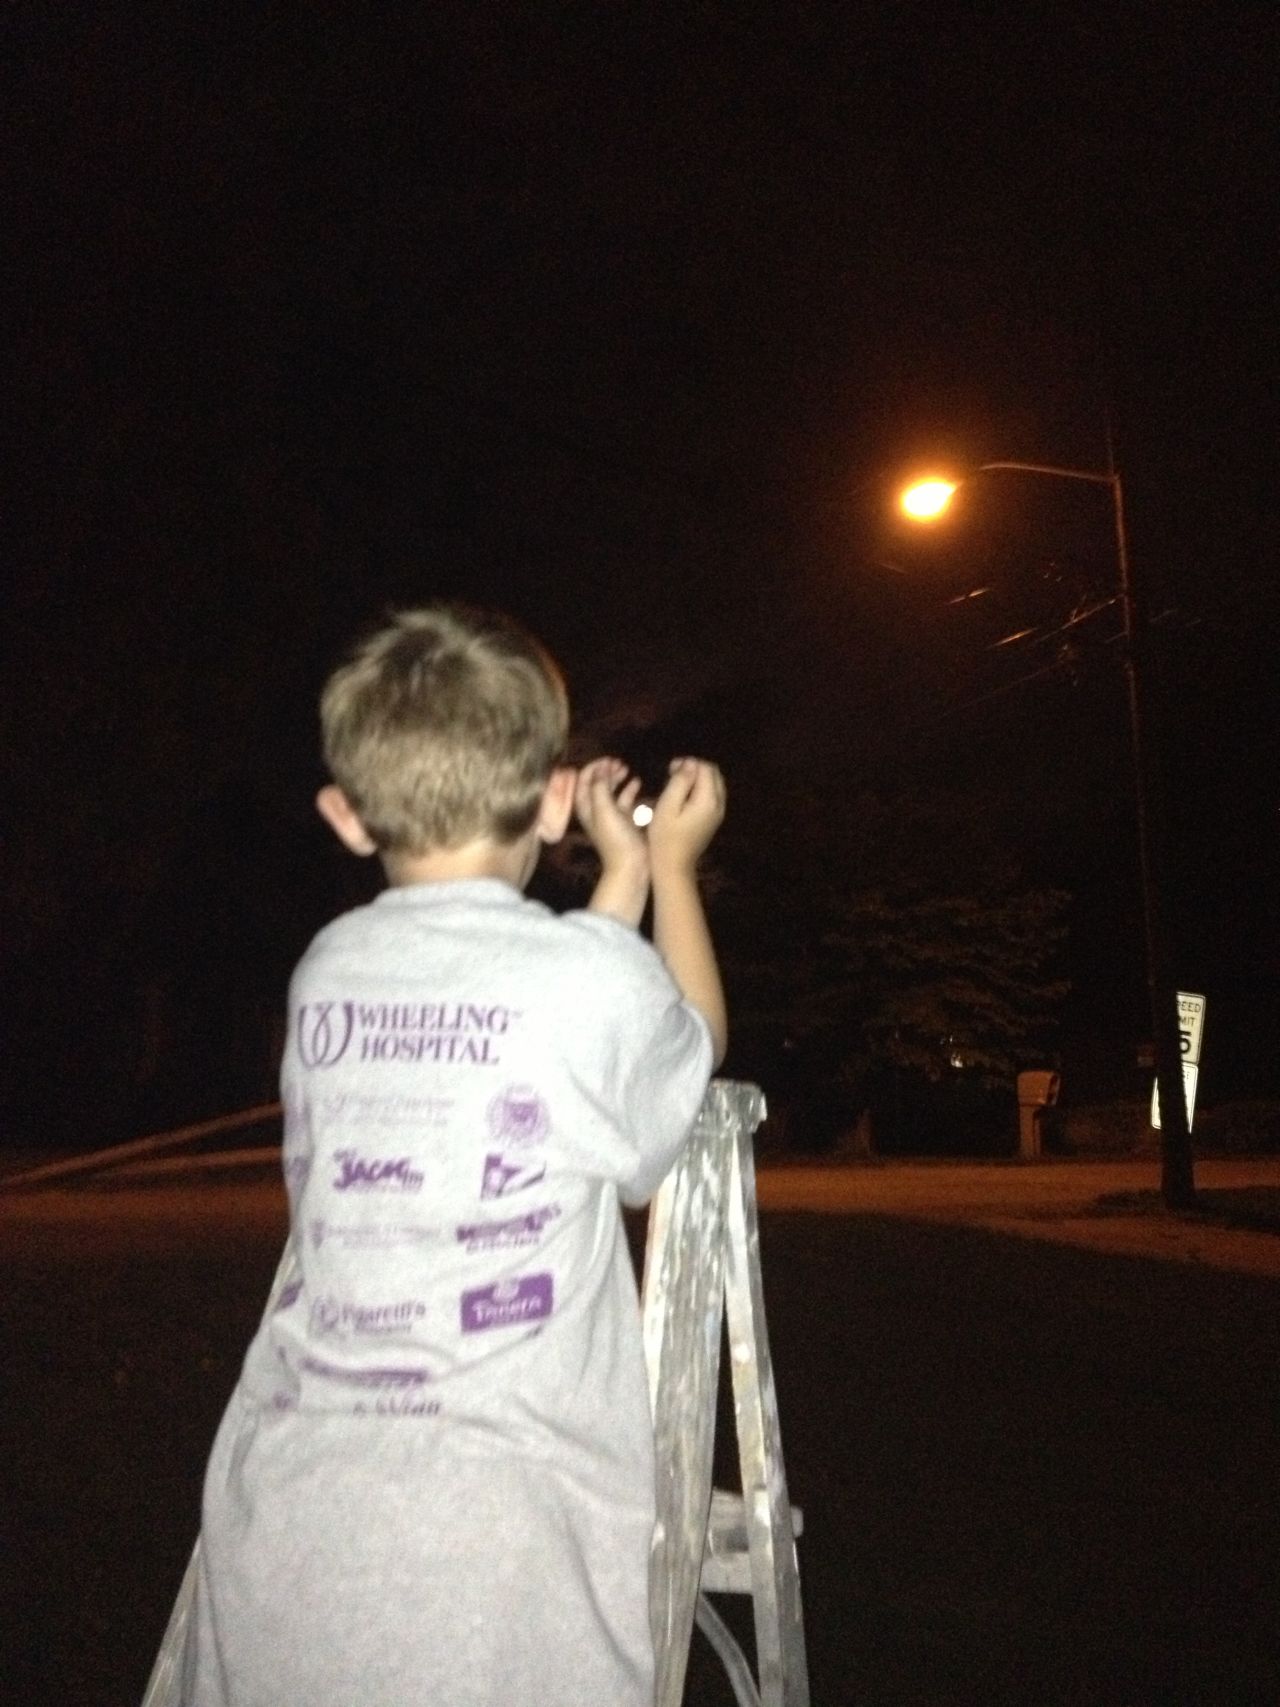 <a href="http://ireport.cnn.com/docs/DOC-994146">Jennifer Uhrig </a>photographed her son, Hayden, capturing the supermoon outside their home in Wheeling, West Virginia. As a science fan, Hayden talked about the supermoon all weekend, and later in the evening the pair went outside to reach for the moon. "Ten-thirty is pretty late for us, so it really turned into a giggle session as we tried to get the right shots," Uhrig said.